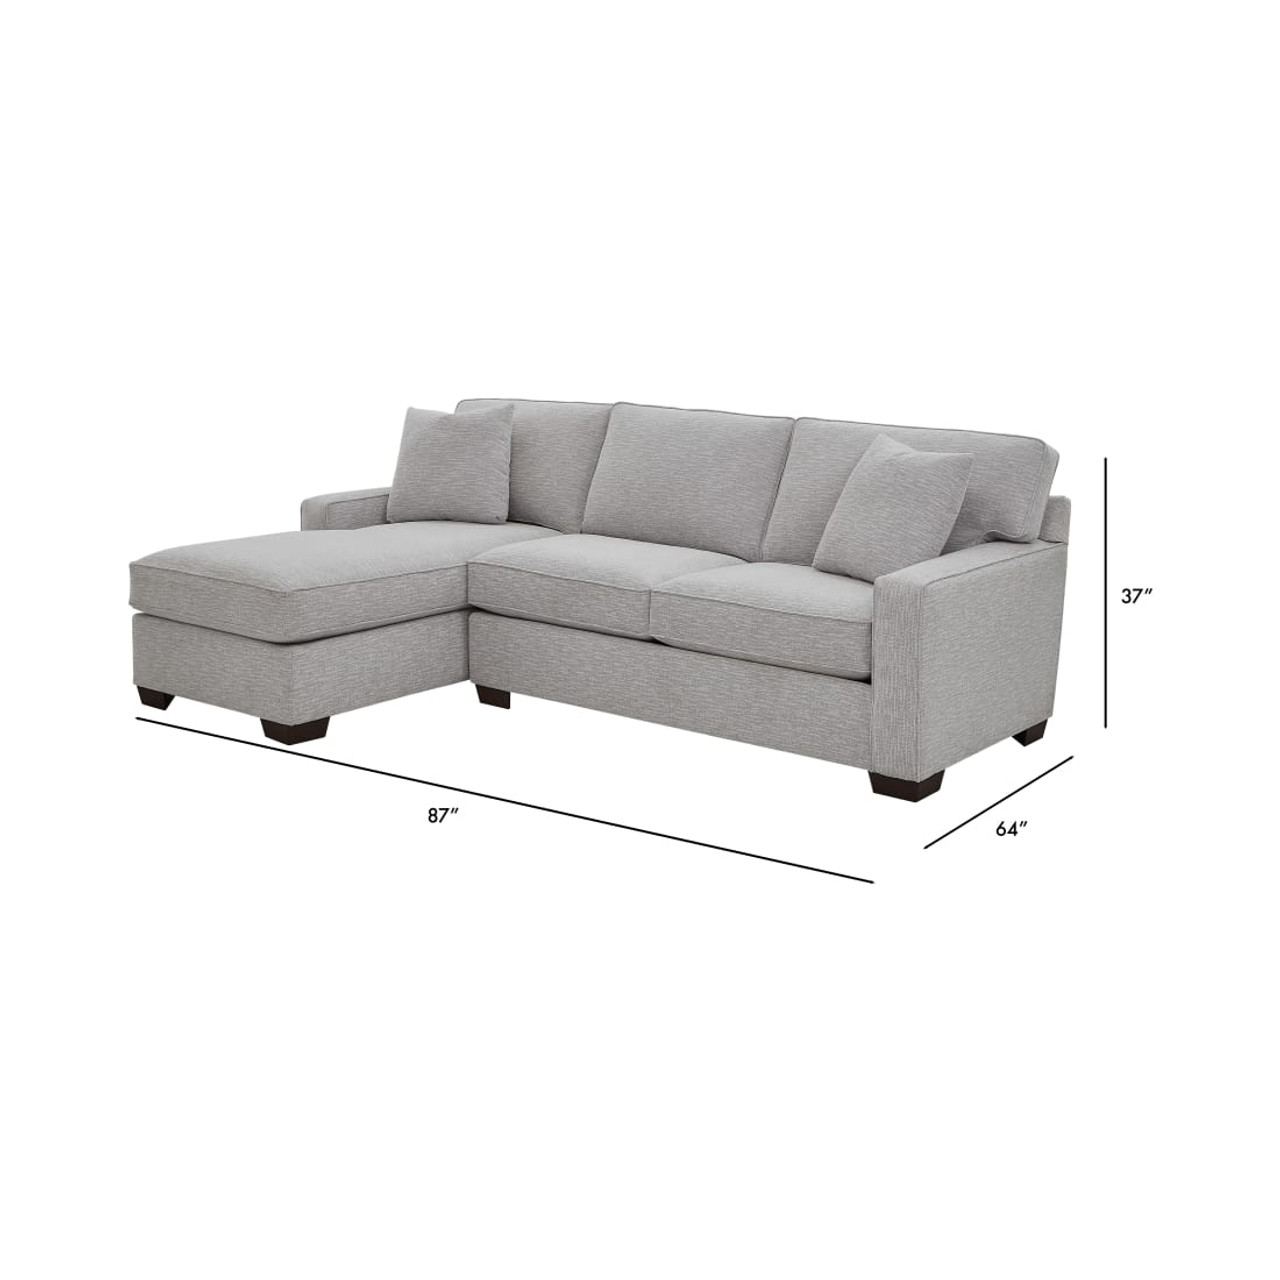 Crestview Track Arm Granite 2-pc sectional w/ left chaise